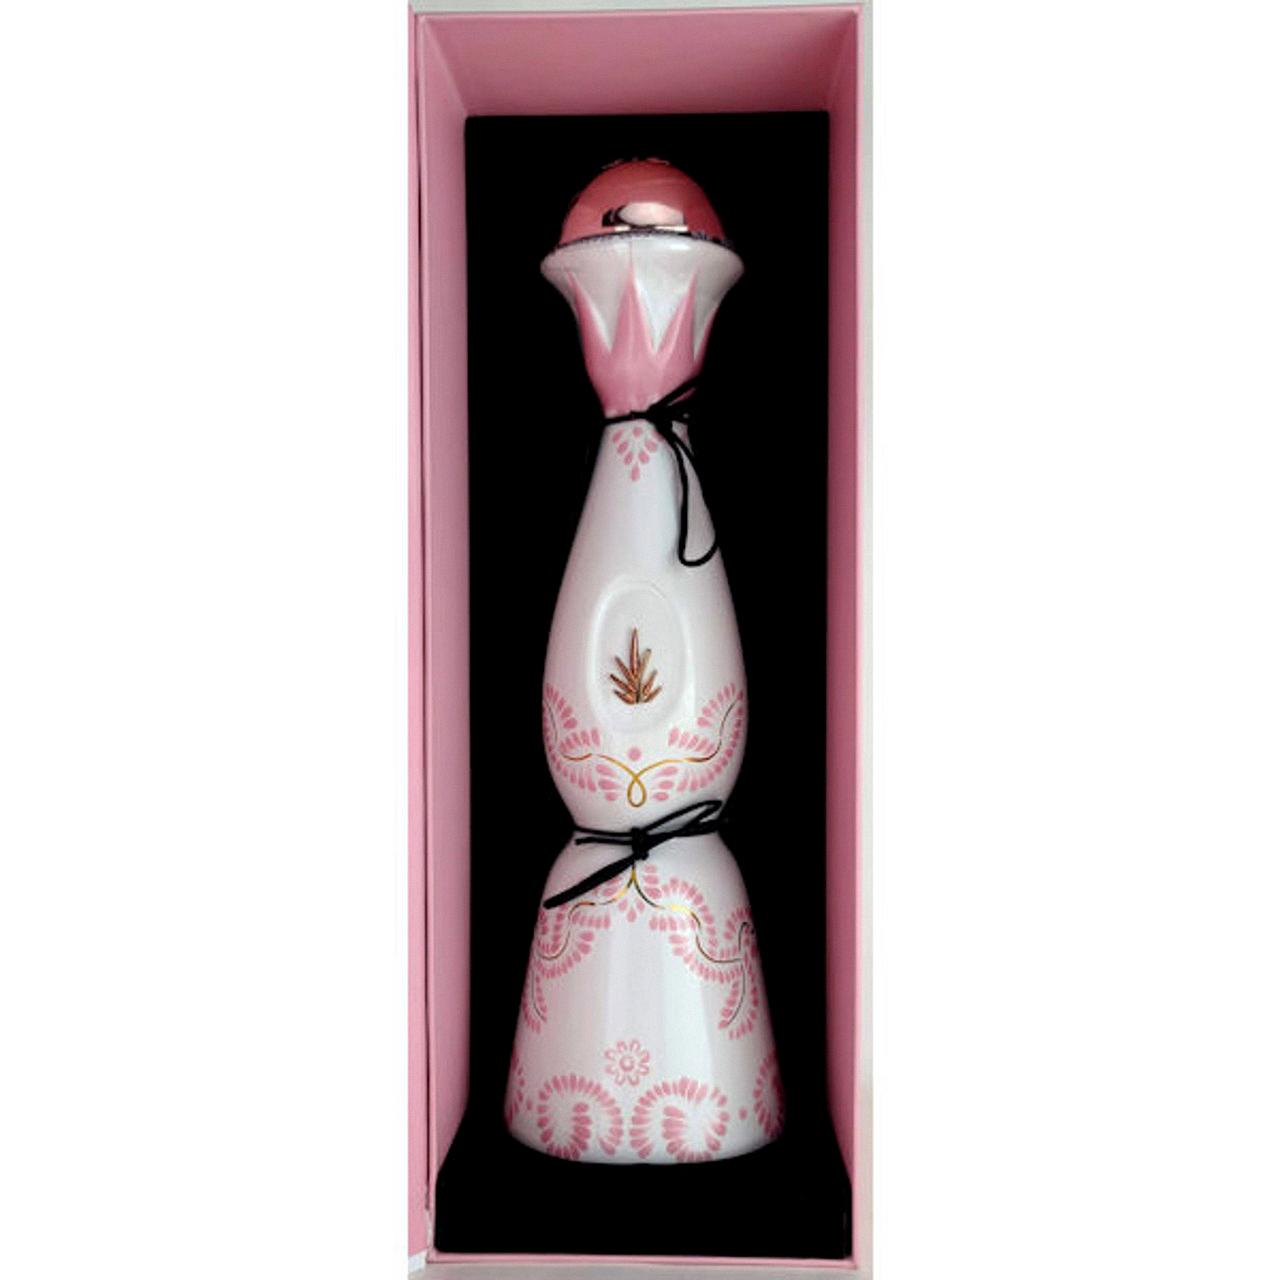 clase azul tequila pink bottle